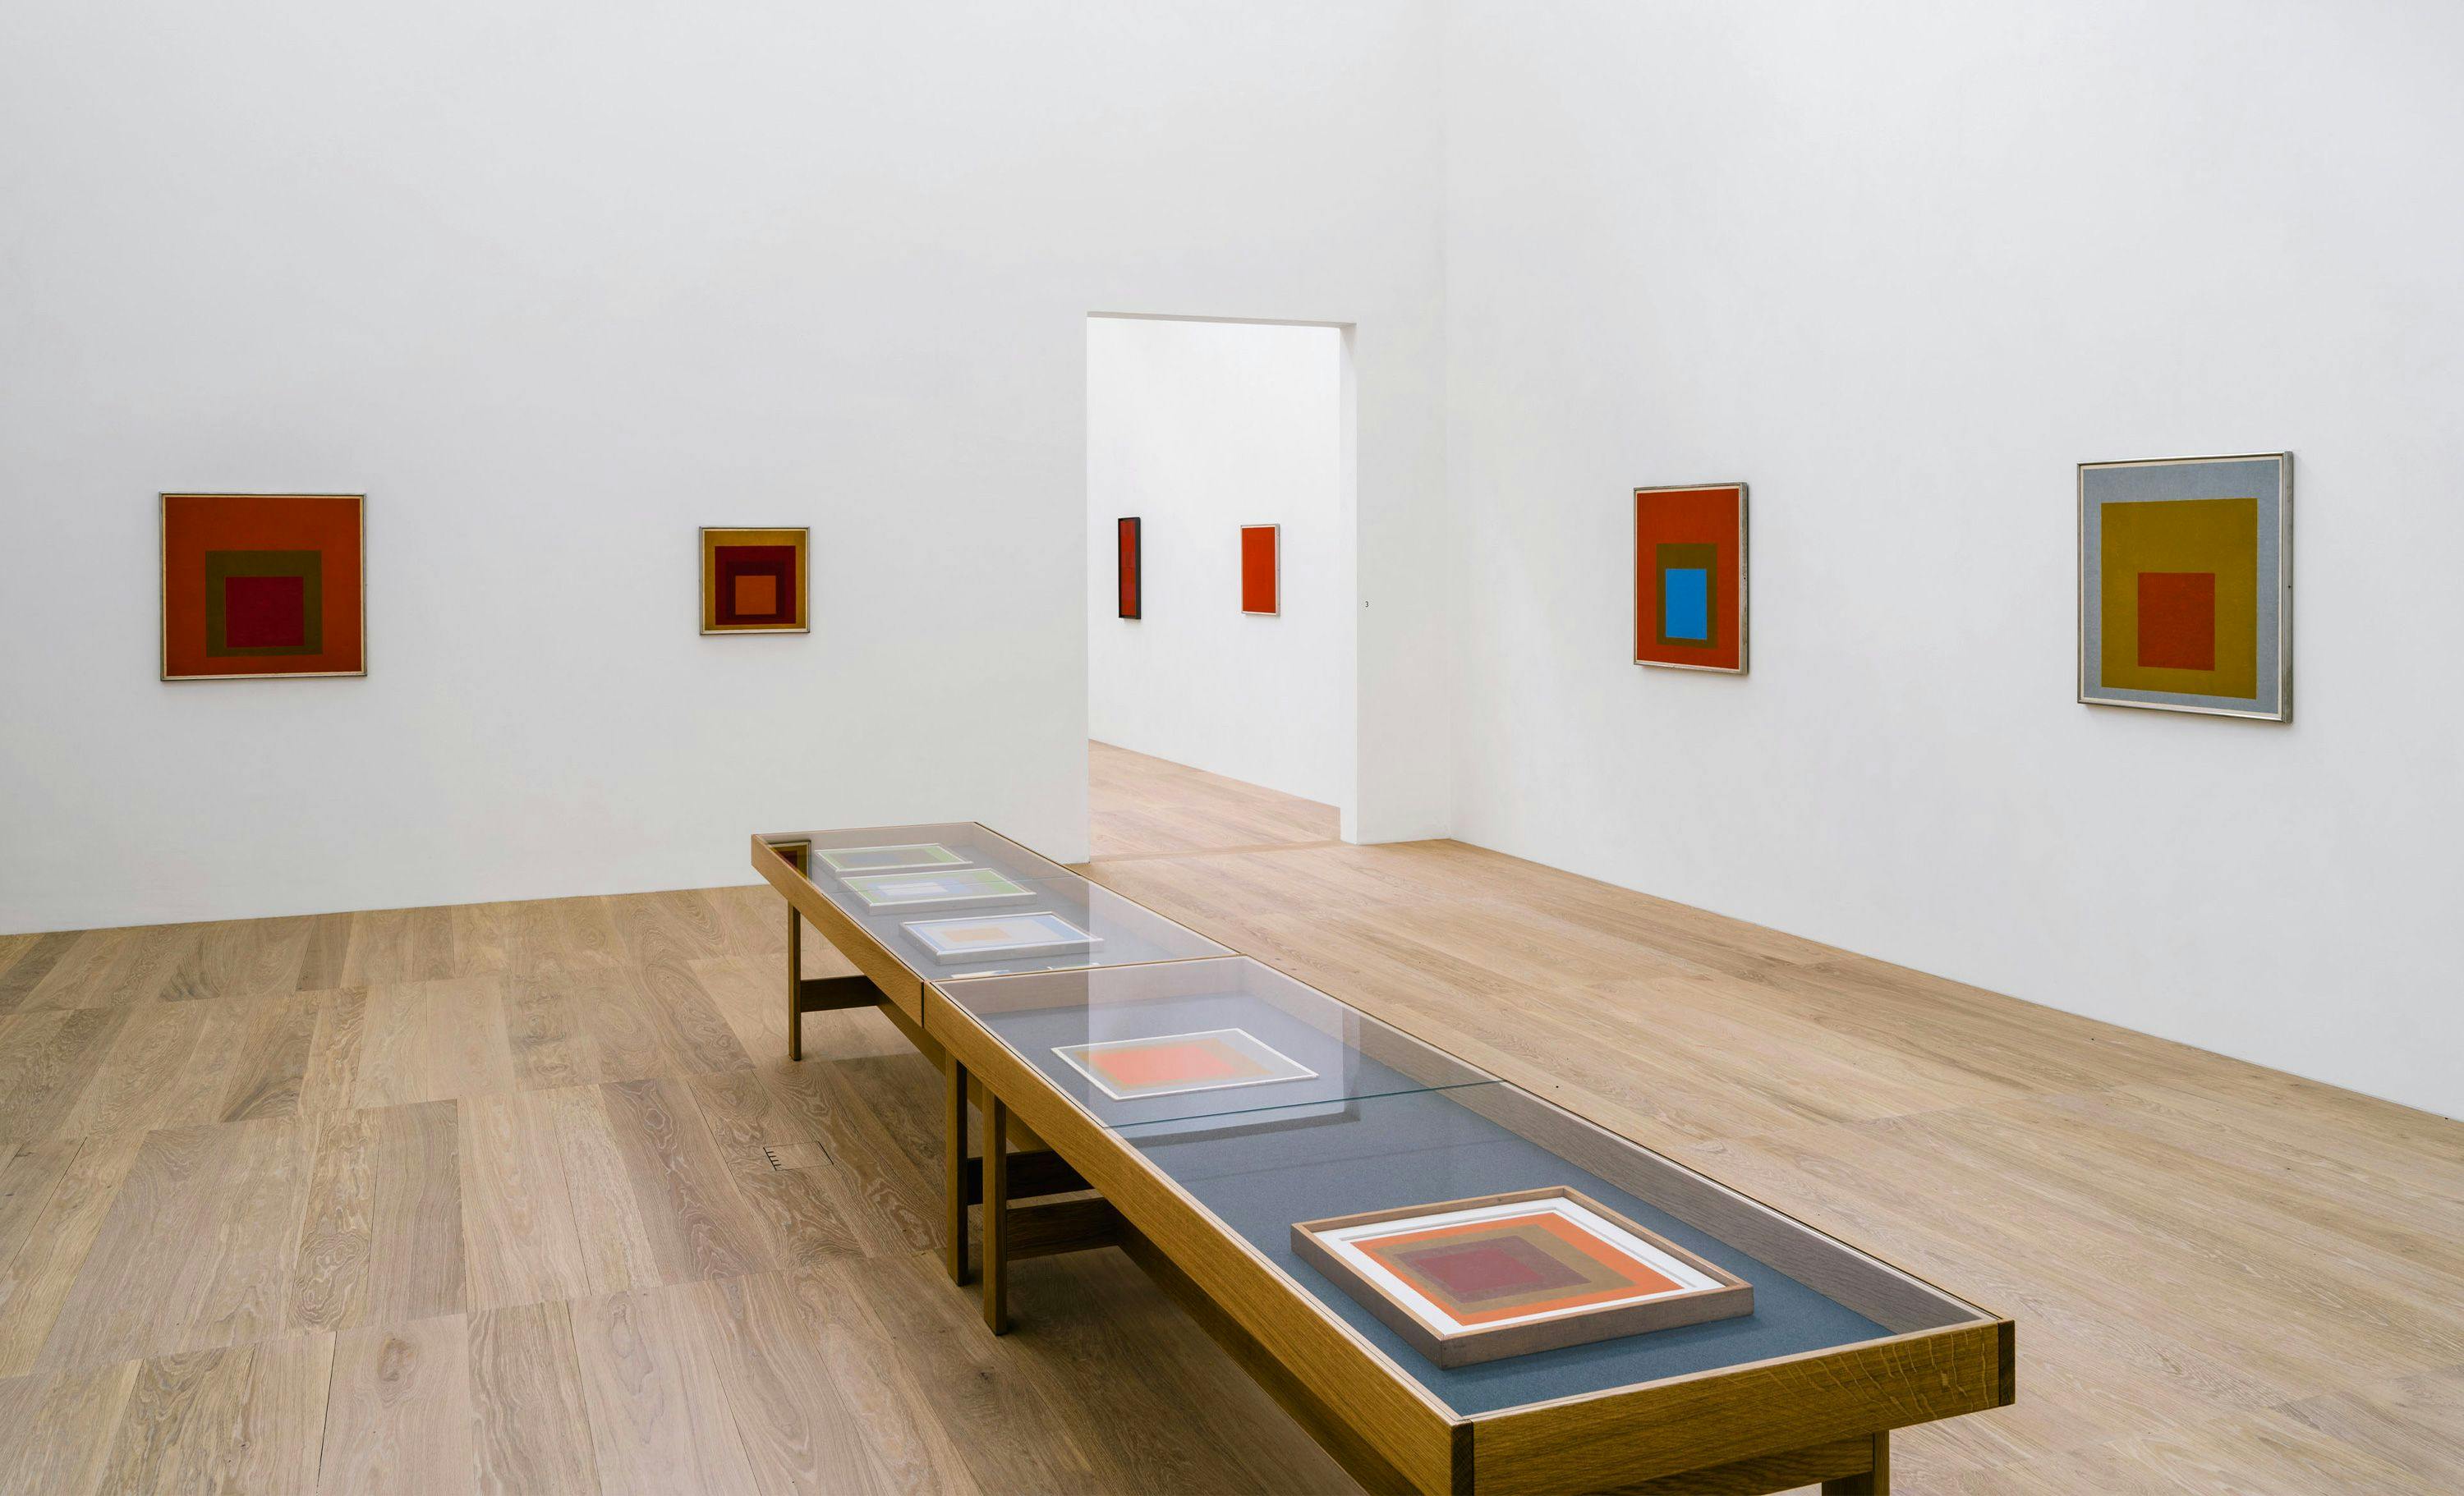 Installation view of the exhibition, Josef Albers: Homage to the Square, at Josef Albers Museum Quadrat Bottrop in Germany, dated 2022 to 2023.